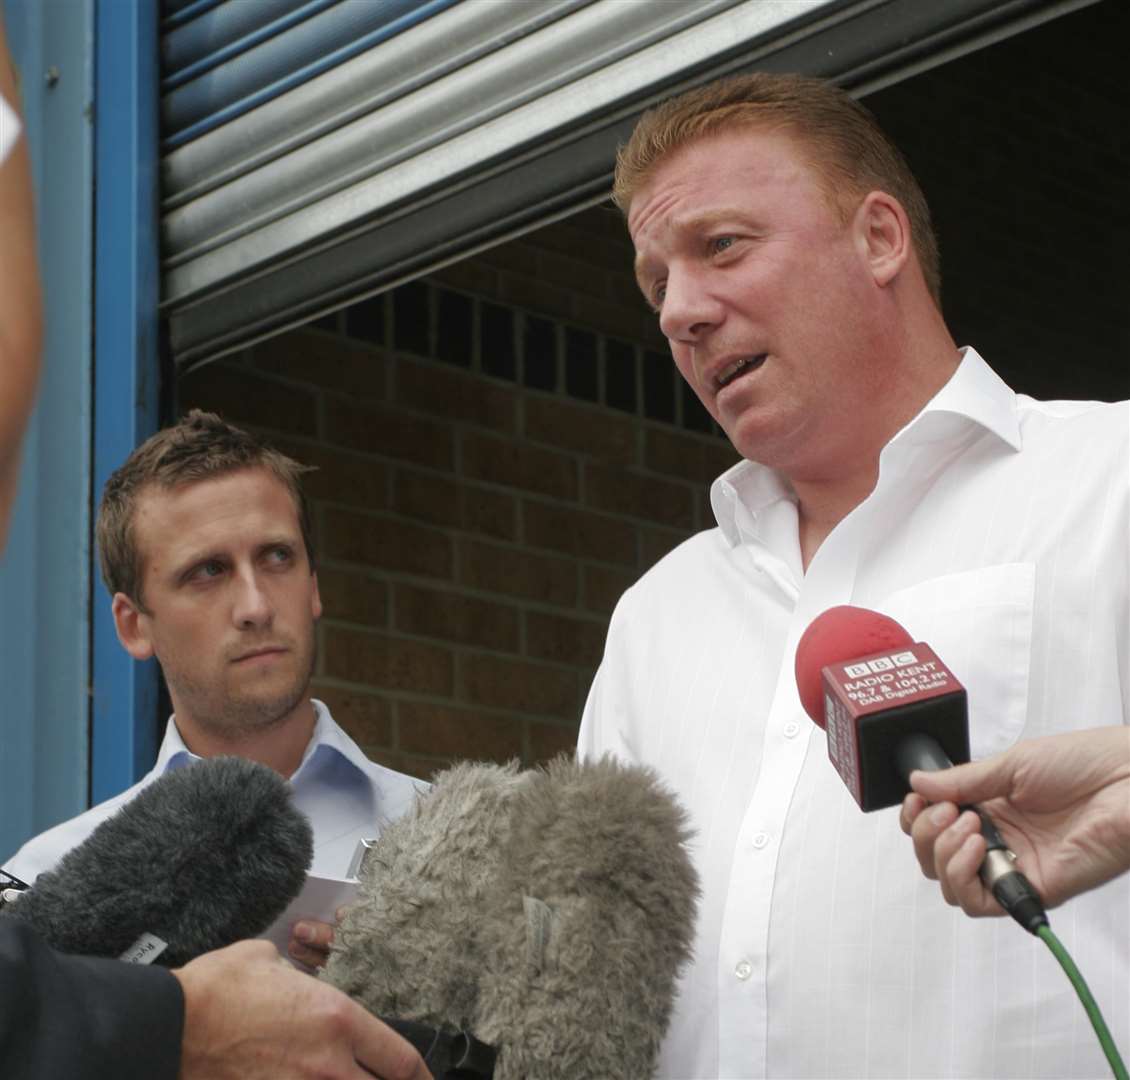 Ronnie Jepson speaks to the media, including the KM's Luke Cawdell, following his departure from Gillingham in 2007 Picture: Peter Still